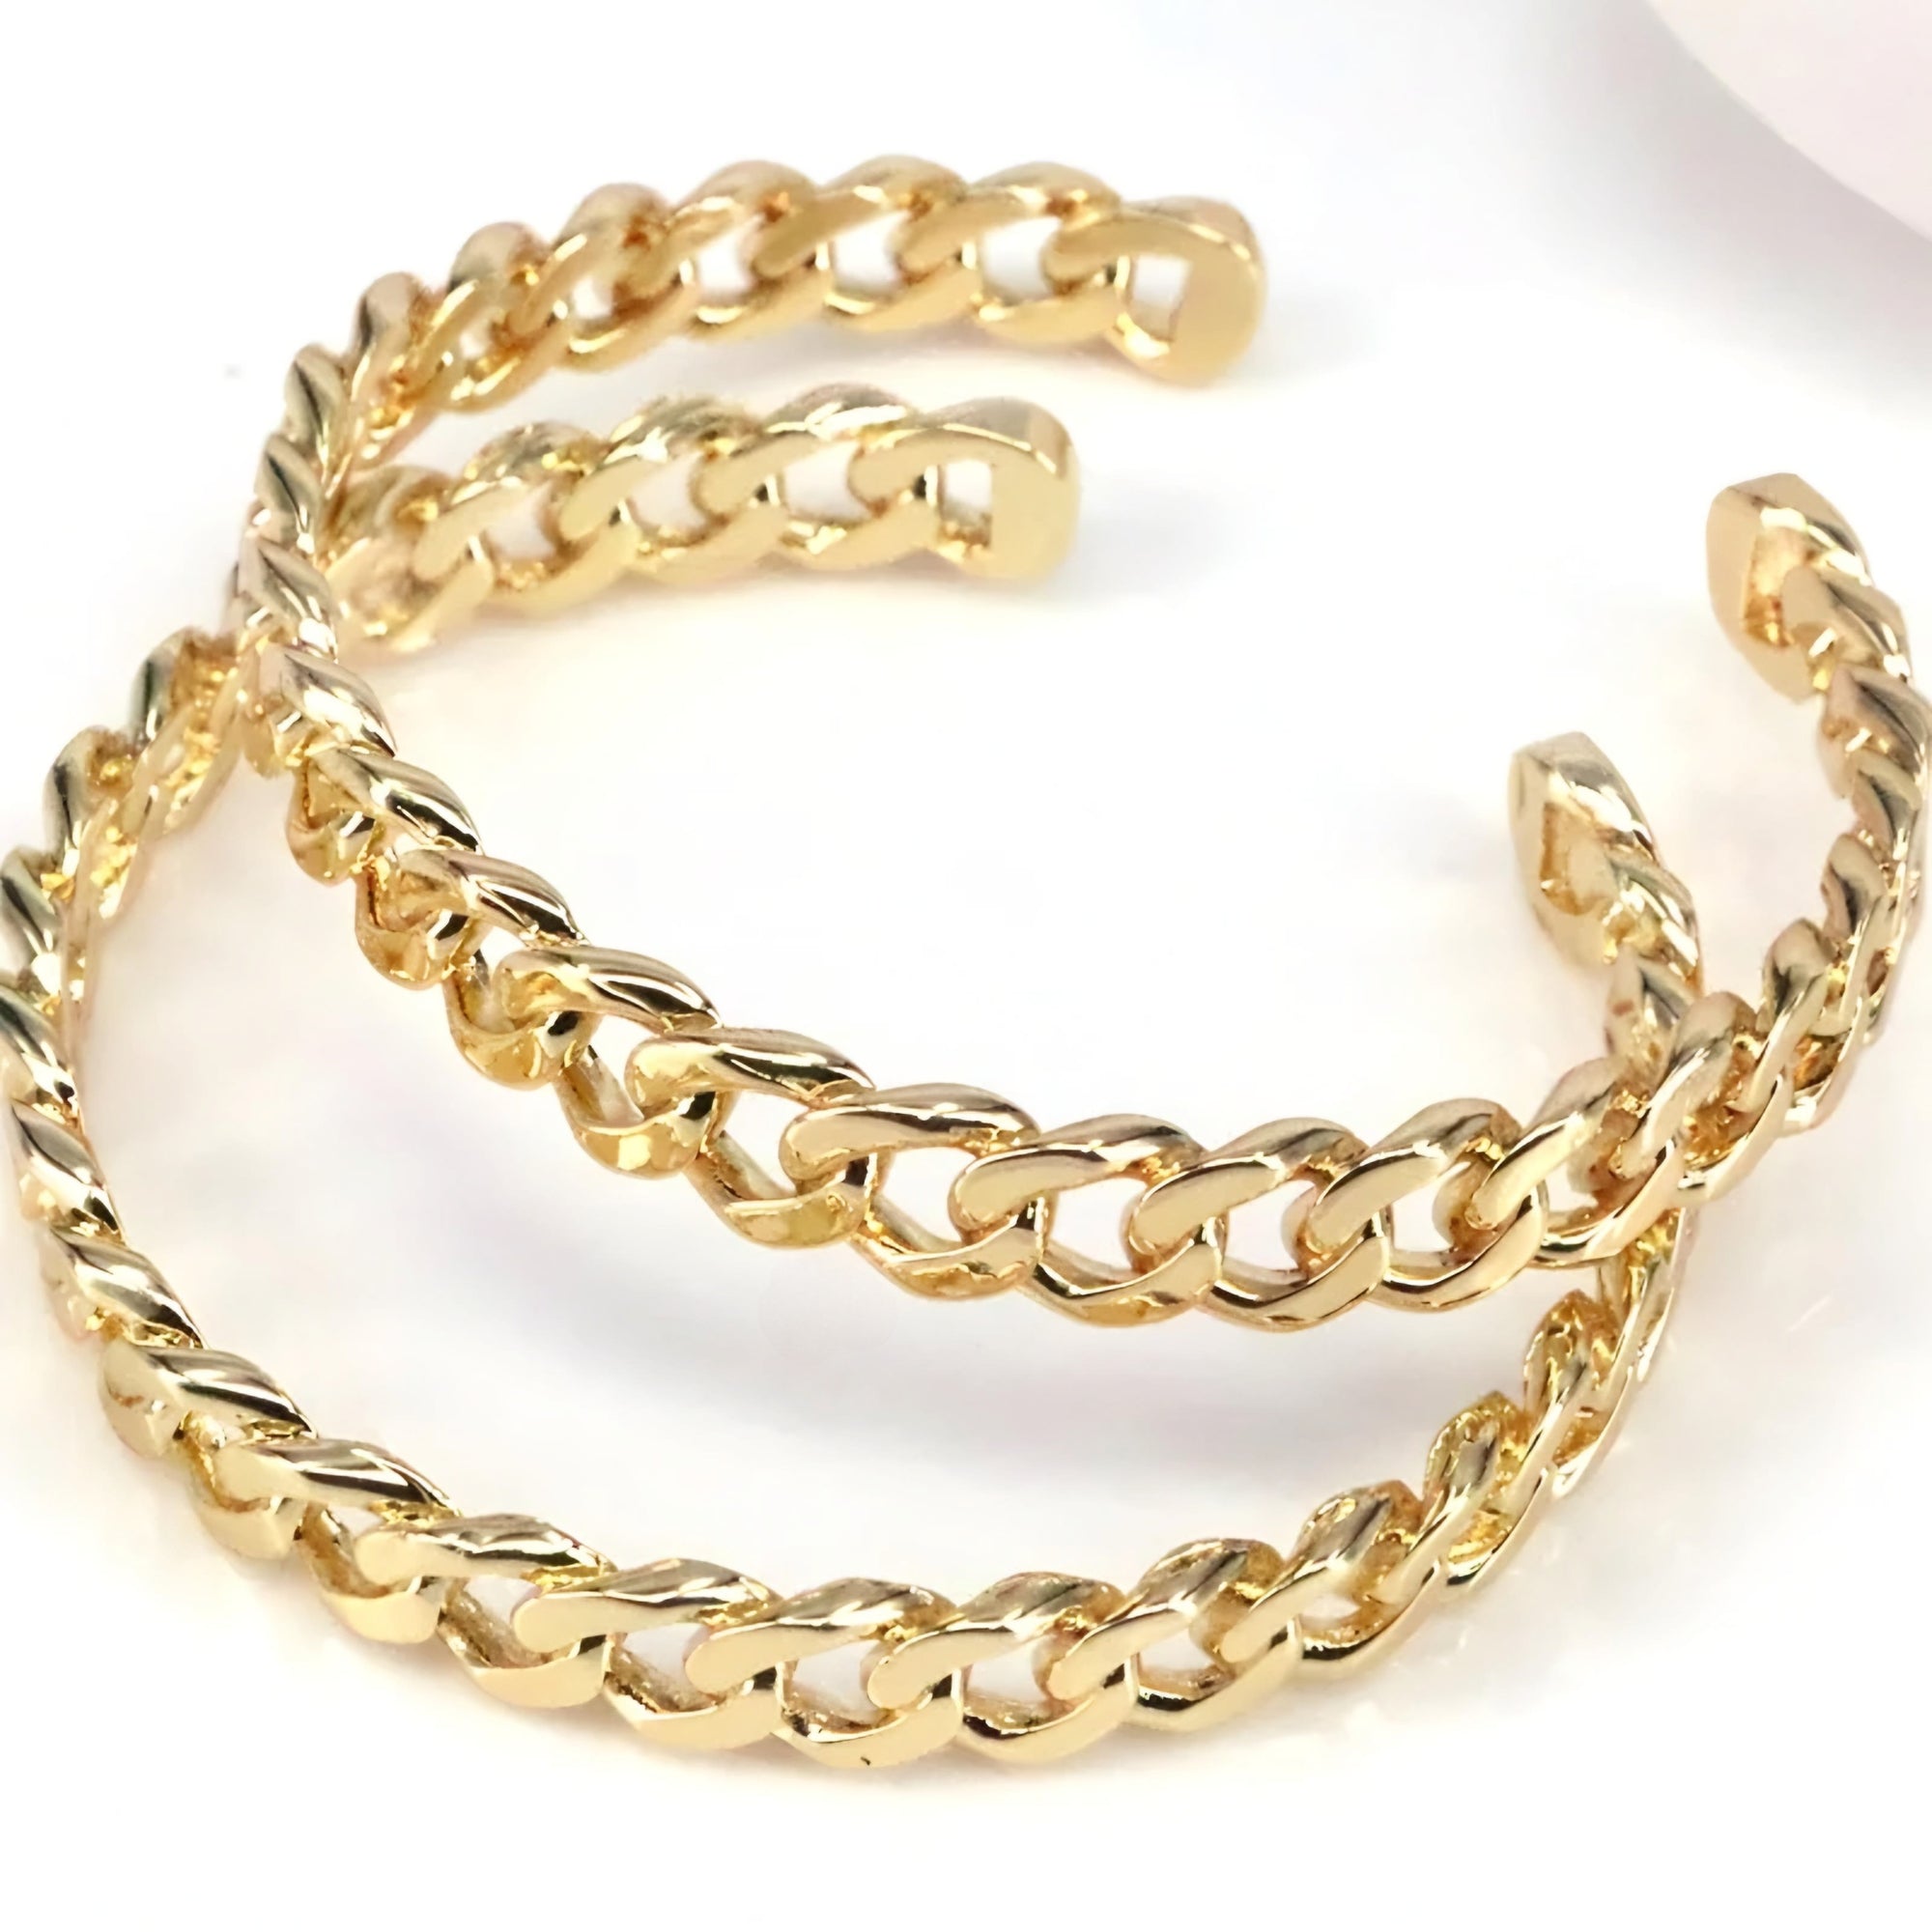 Chain Of Command Gold Chain Link Bangle